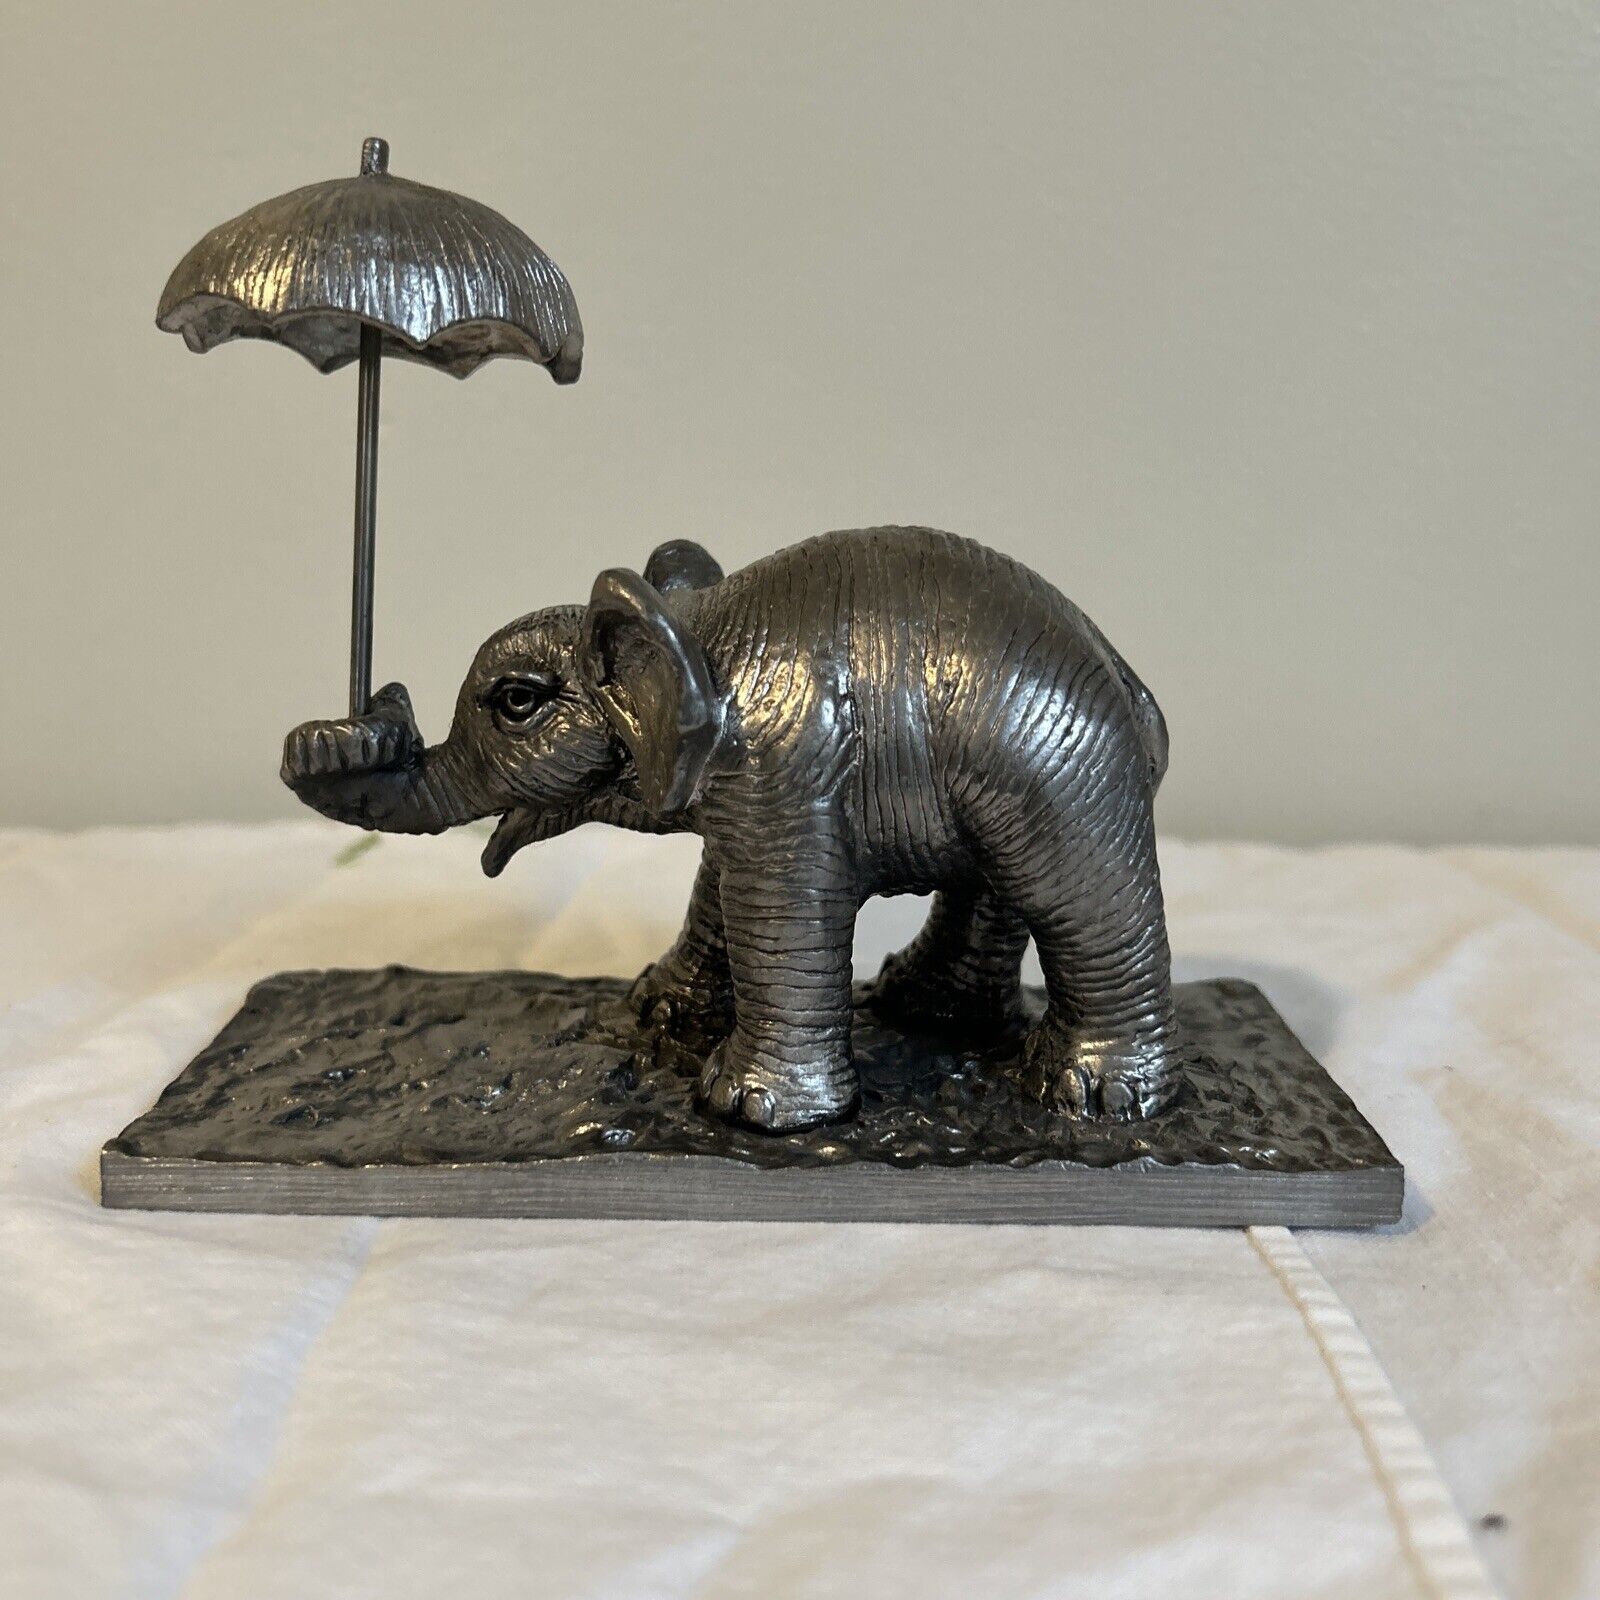 Michael Ricker Limited Edition Circus Elephant with Umbrella Pewter Figurine